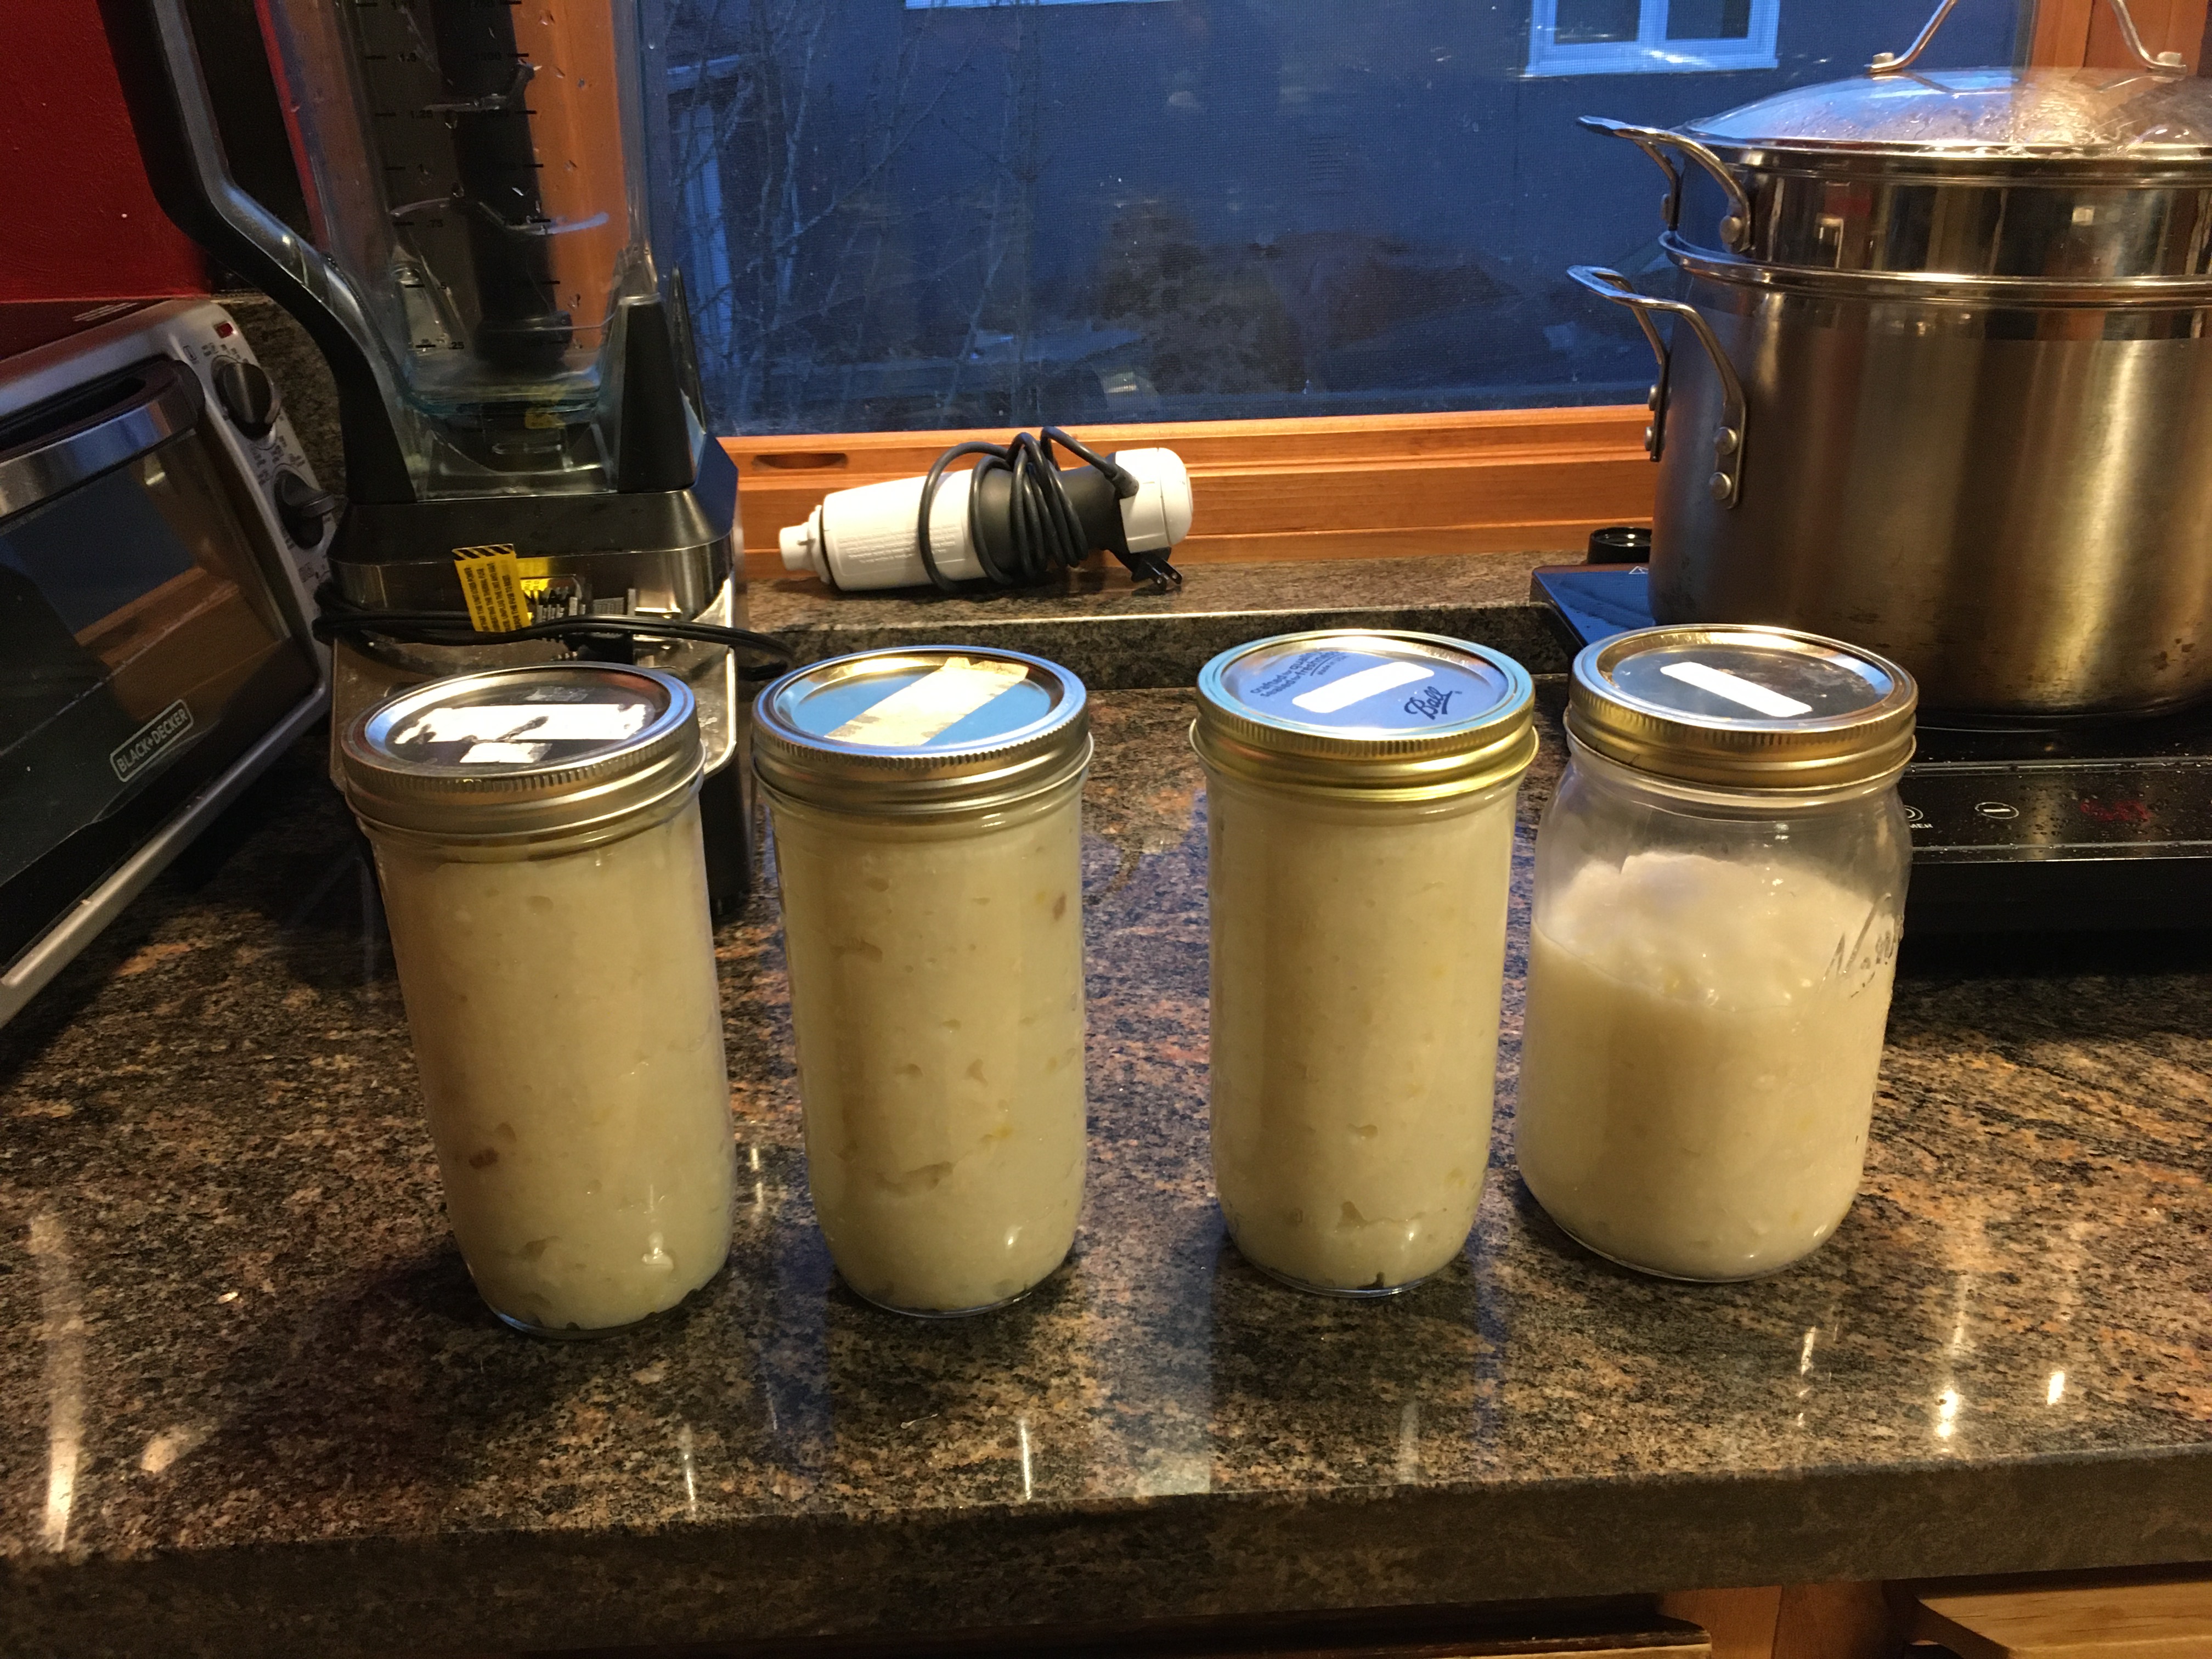 4 mason jars filled with white liquids on a kitchen counter, with a blender, stick blender, and pot behind them.